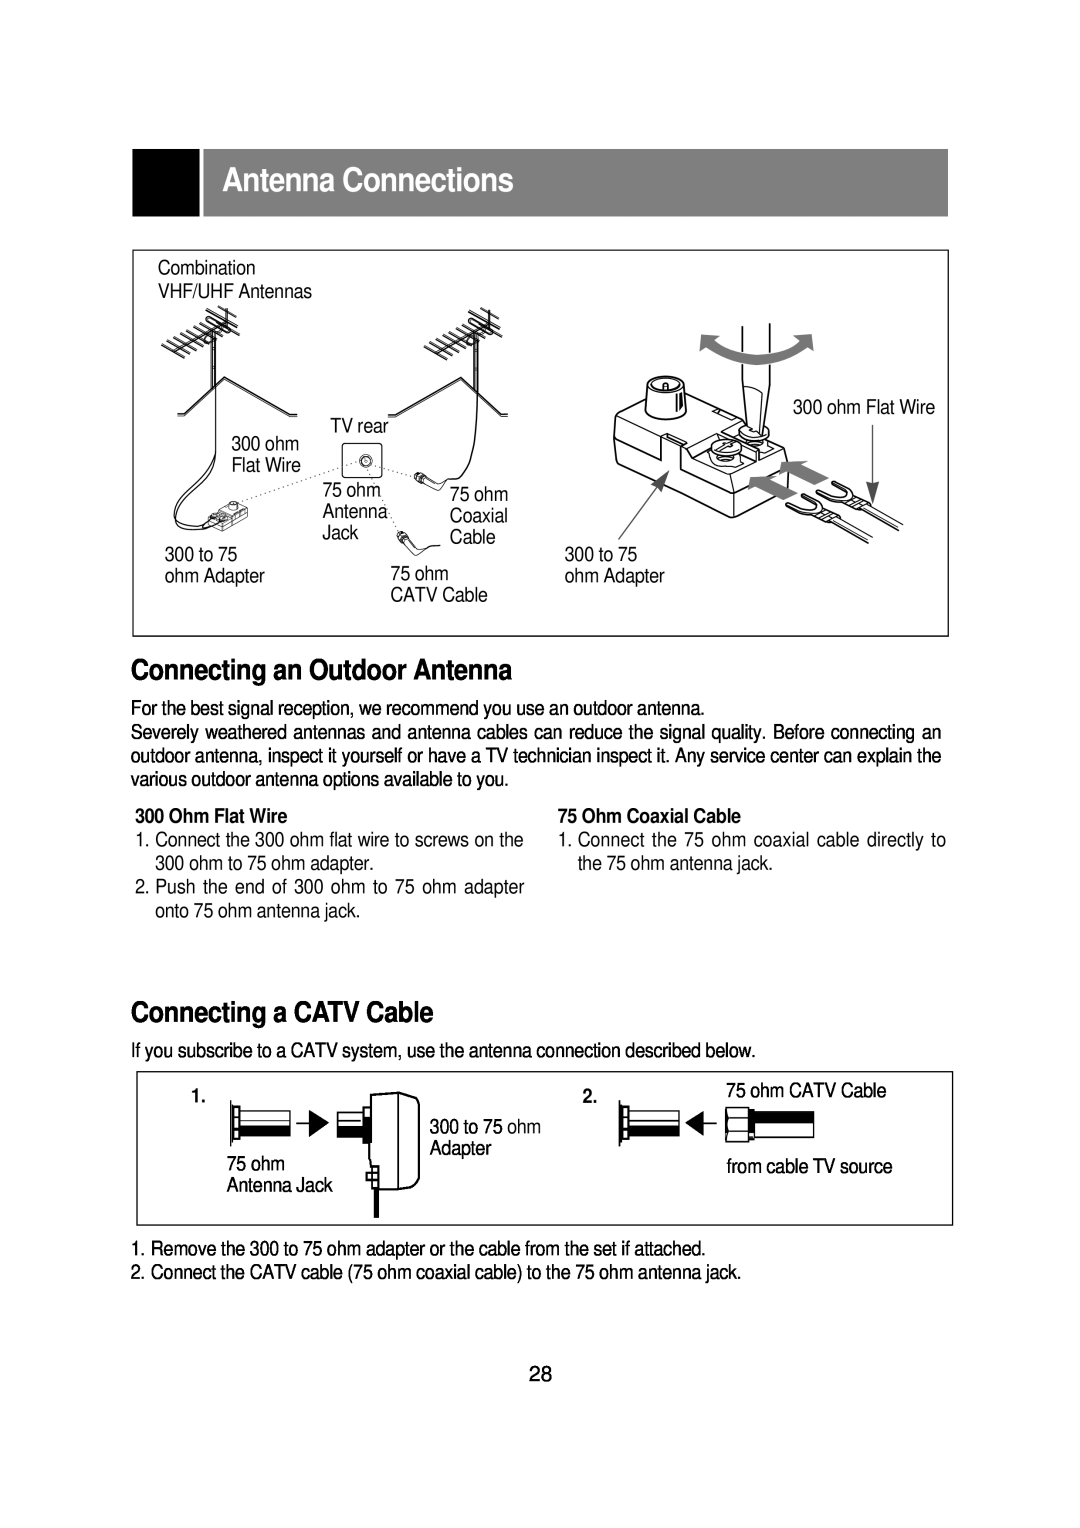 Zenith R40W46 warranty Antenna Connections, Connecting an Outdoor Antenna, Connecting a CATV Cable 